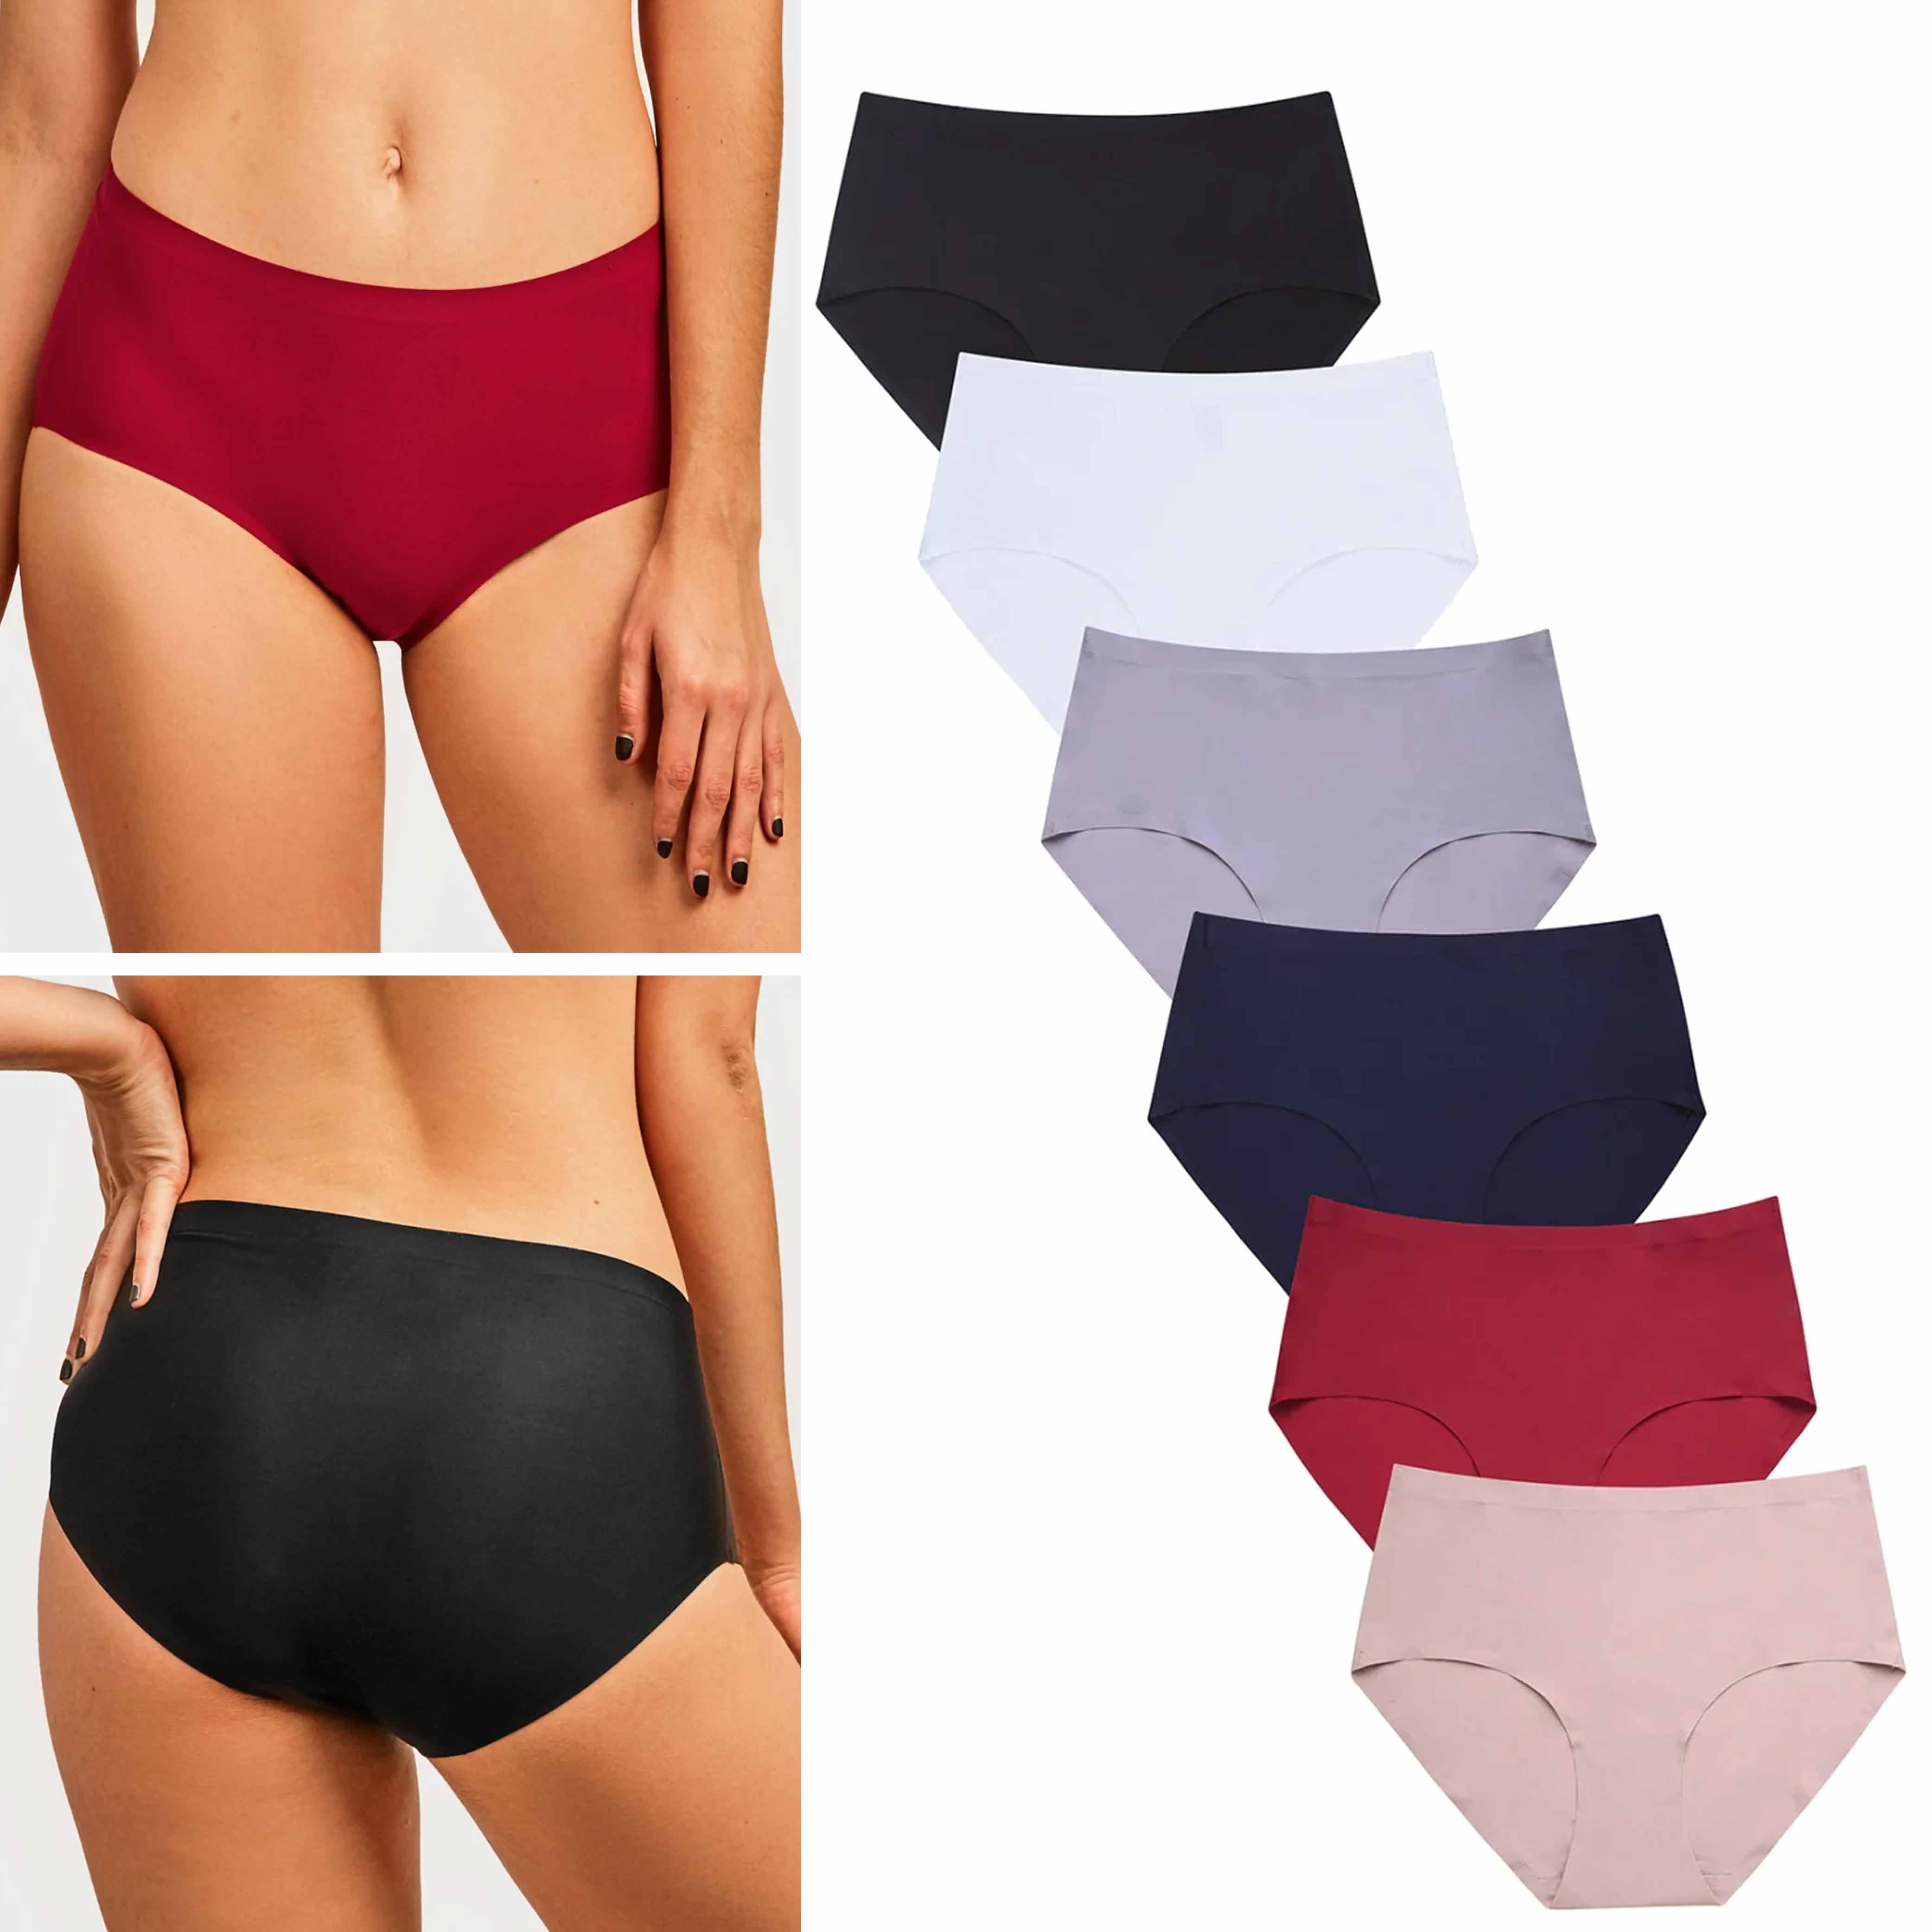 6 Women's No Show Brief Panty Hipster Panties Underwear Seamless